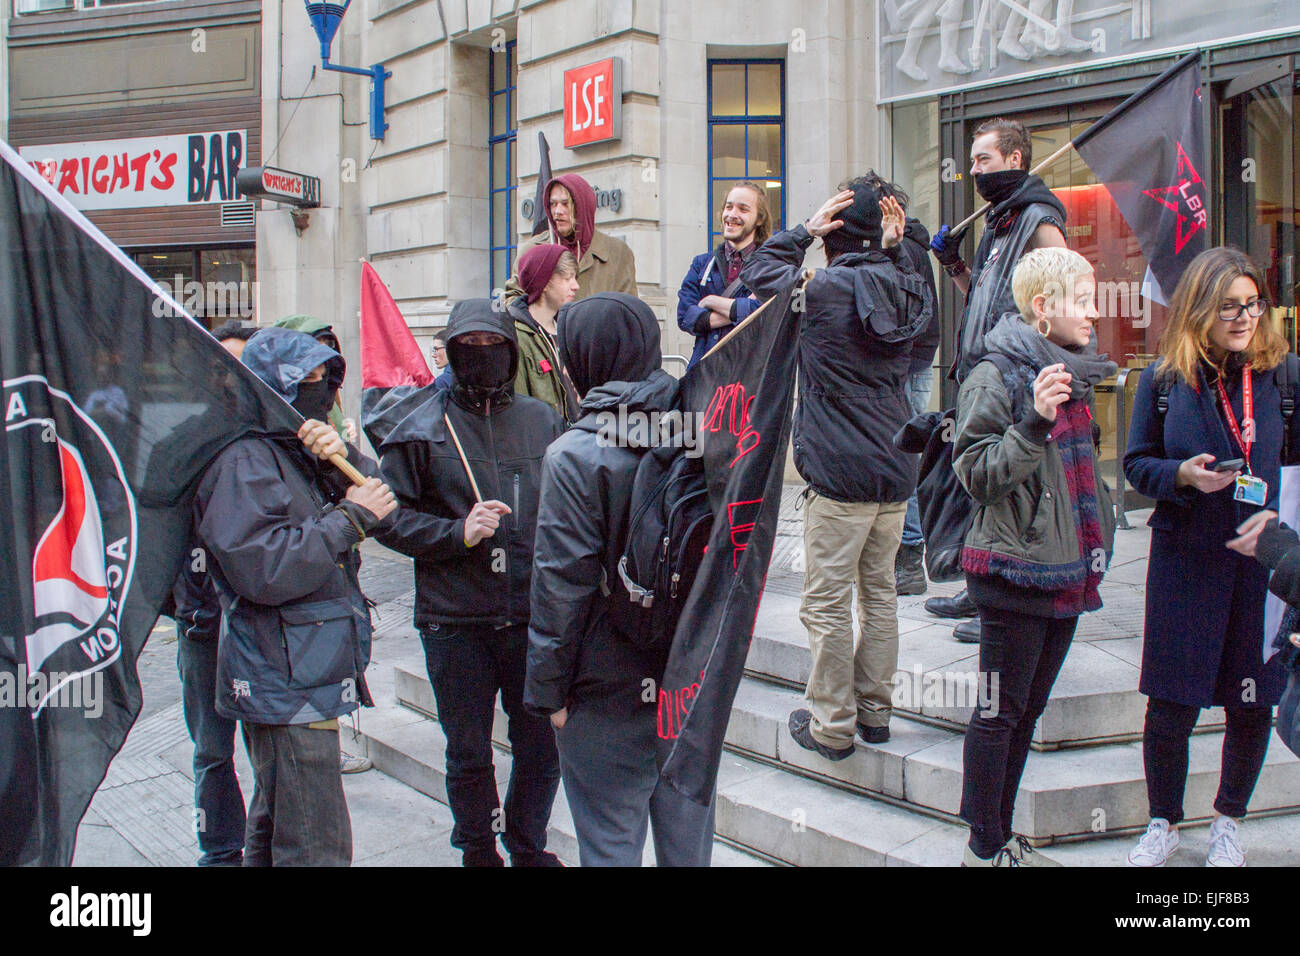 Houghton Street, London, UK - 25th March 2015: Protesters dressed in black outside the LSE Old Building at the start of the Stop The Cuts march from London School of Economics to the London College of Communication in Elephant and Castle. Stock Photo